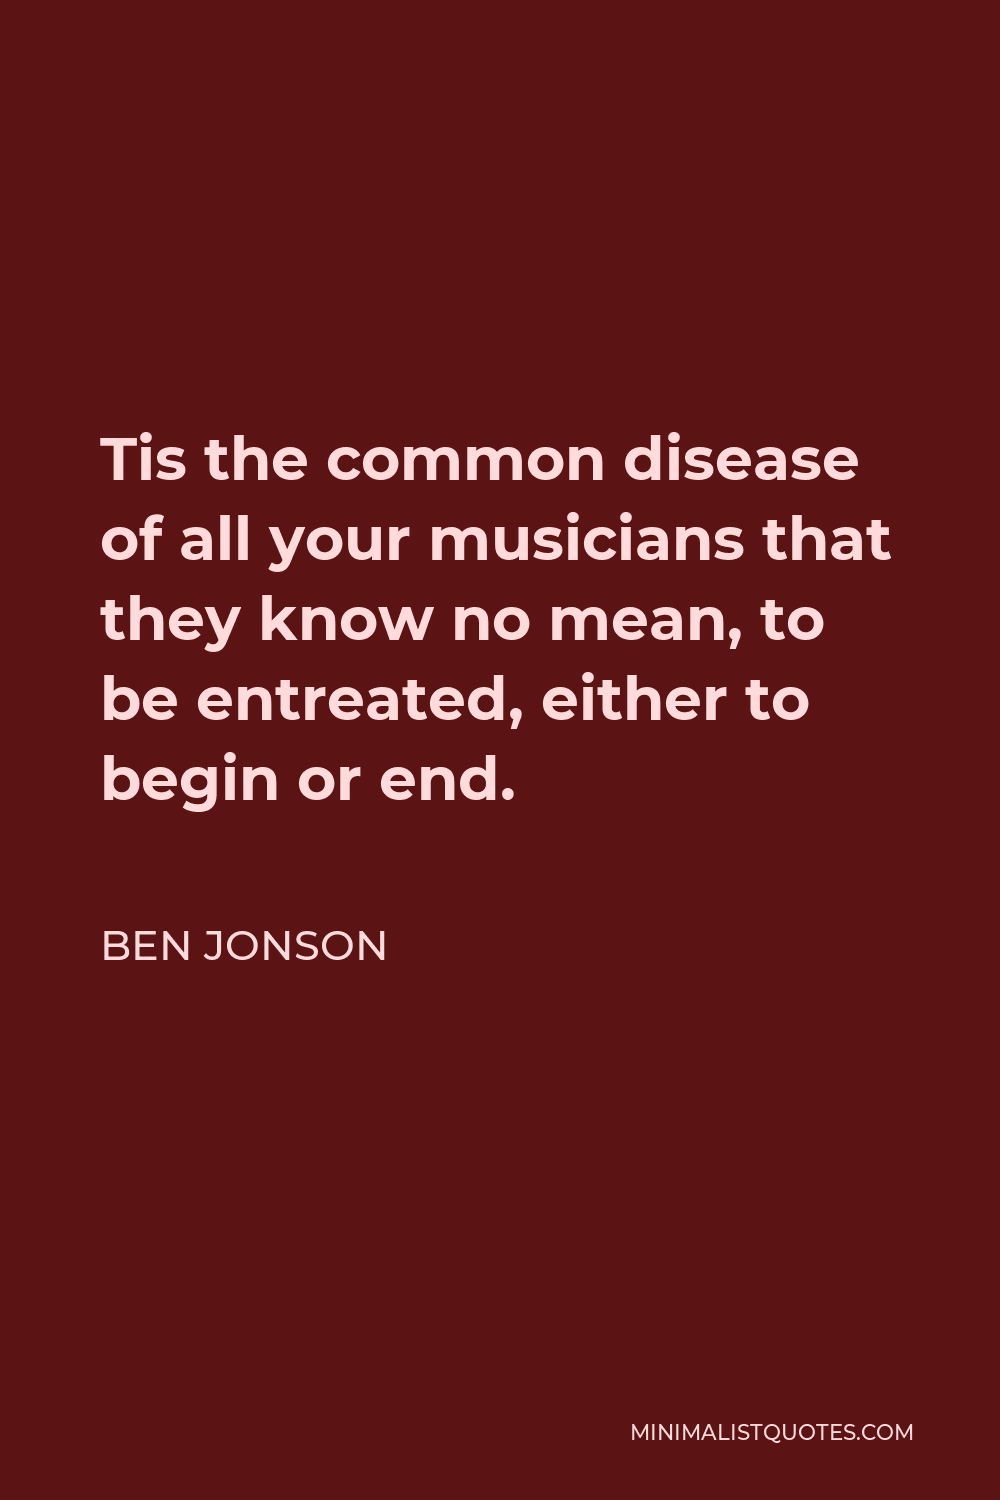 Ben Jonson Quote - Tis the common disease of all your musicians that they know no mean, to be entreated, either to begin or end.